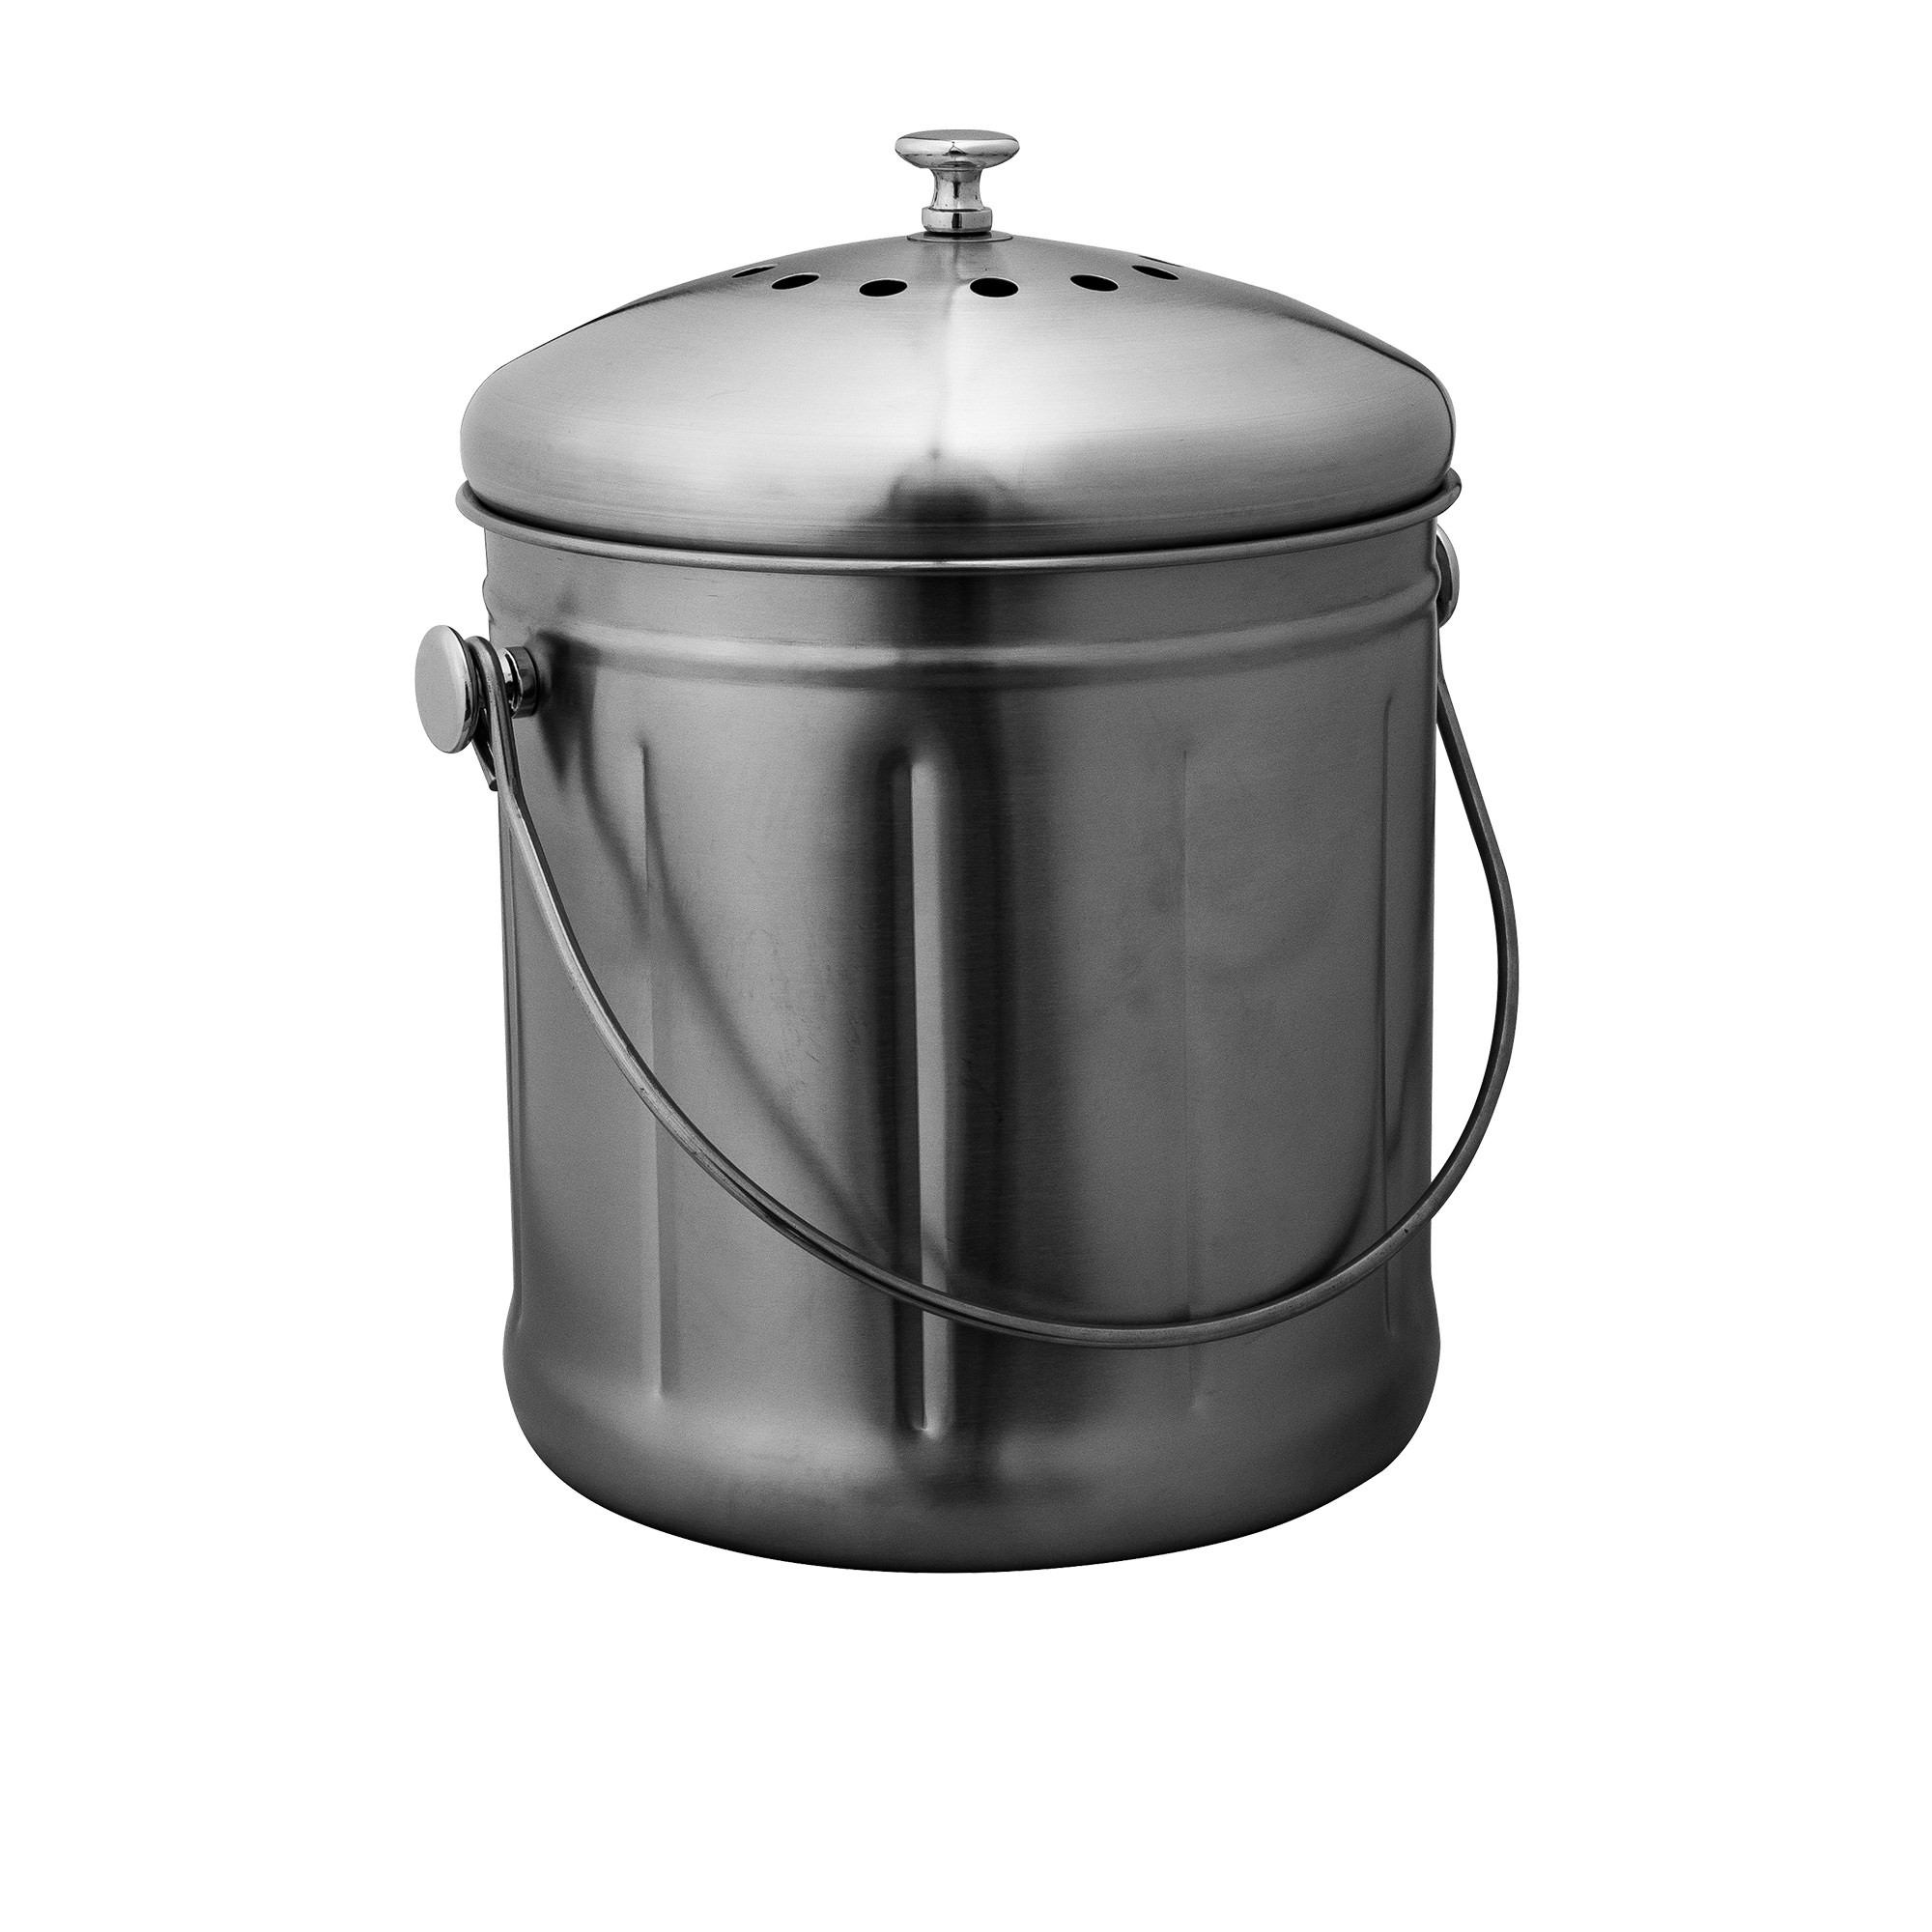 Avanti Compost Bin 10L Brushed Stainless Steel Image 1